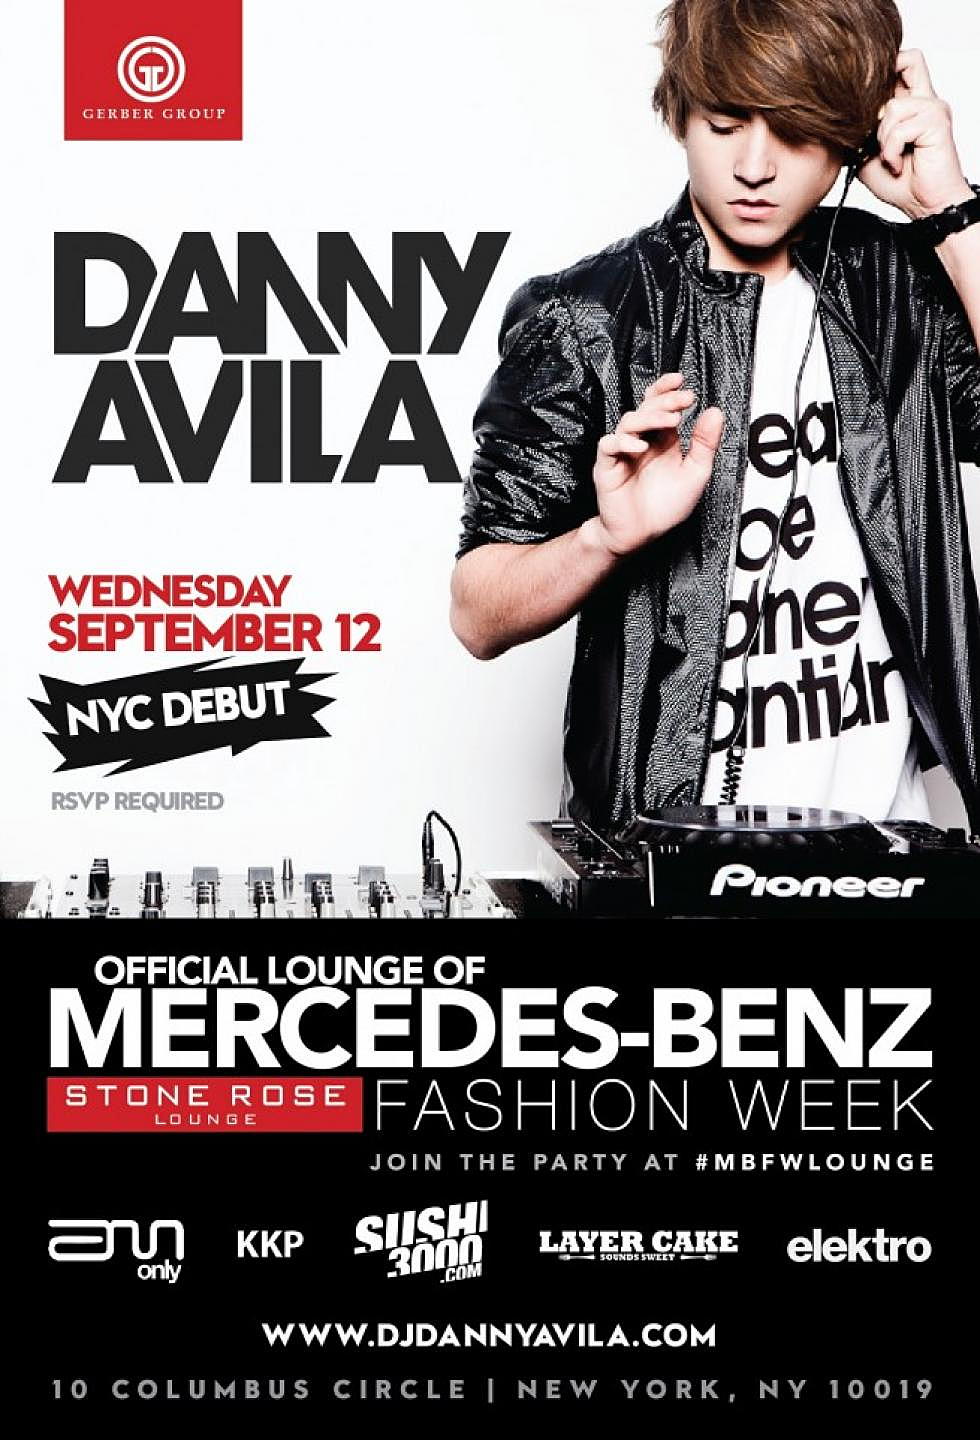 Quickie with a DJ Mercedes-Benz Fashion Week Edition: Danny Avila